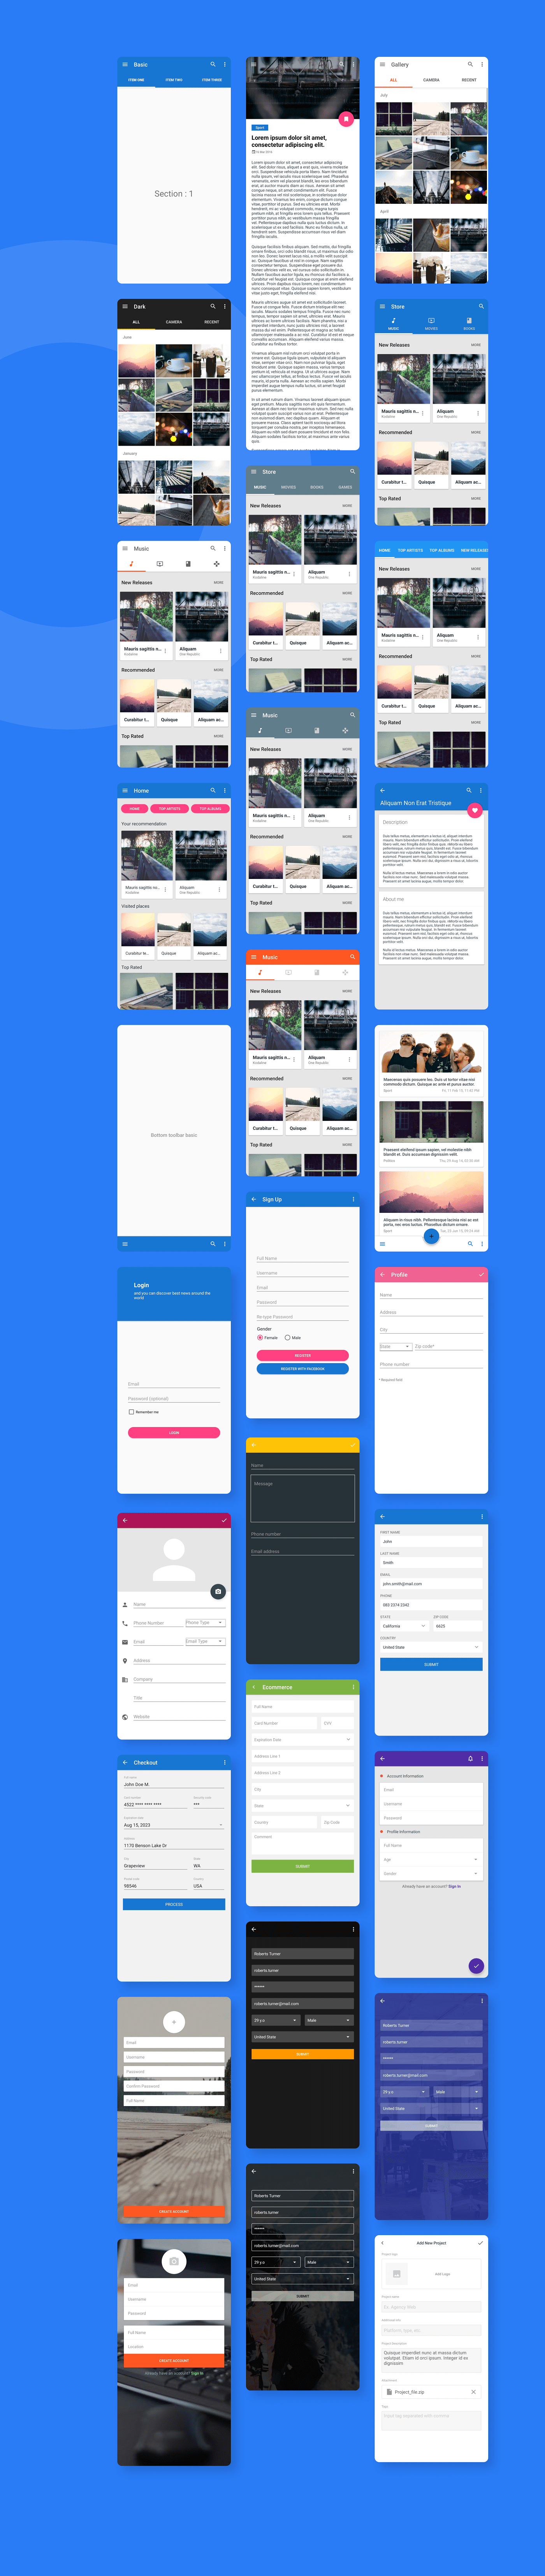 MaterialX - Android Material Design UI Components 2.7 - 22